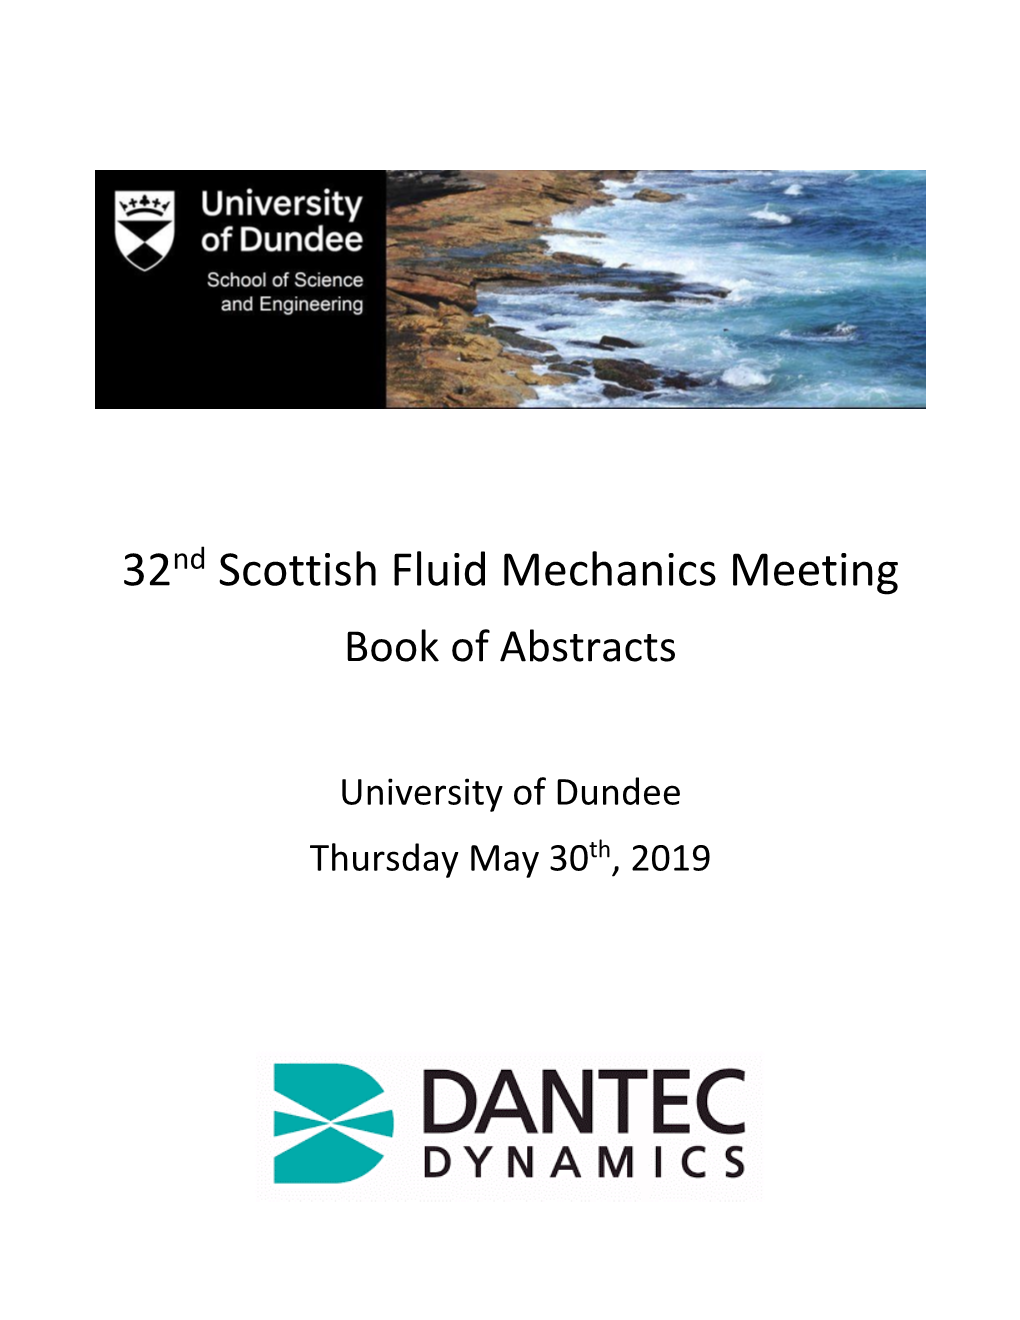 32Nd Scottish Fluid Mechanics Meeting Book of Abstracts